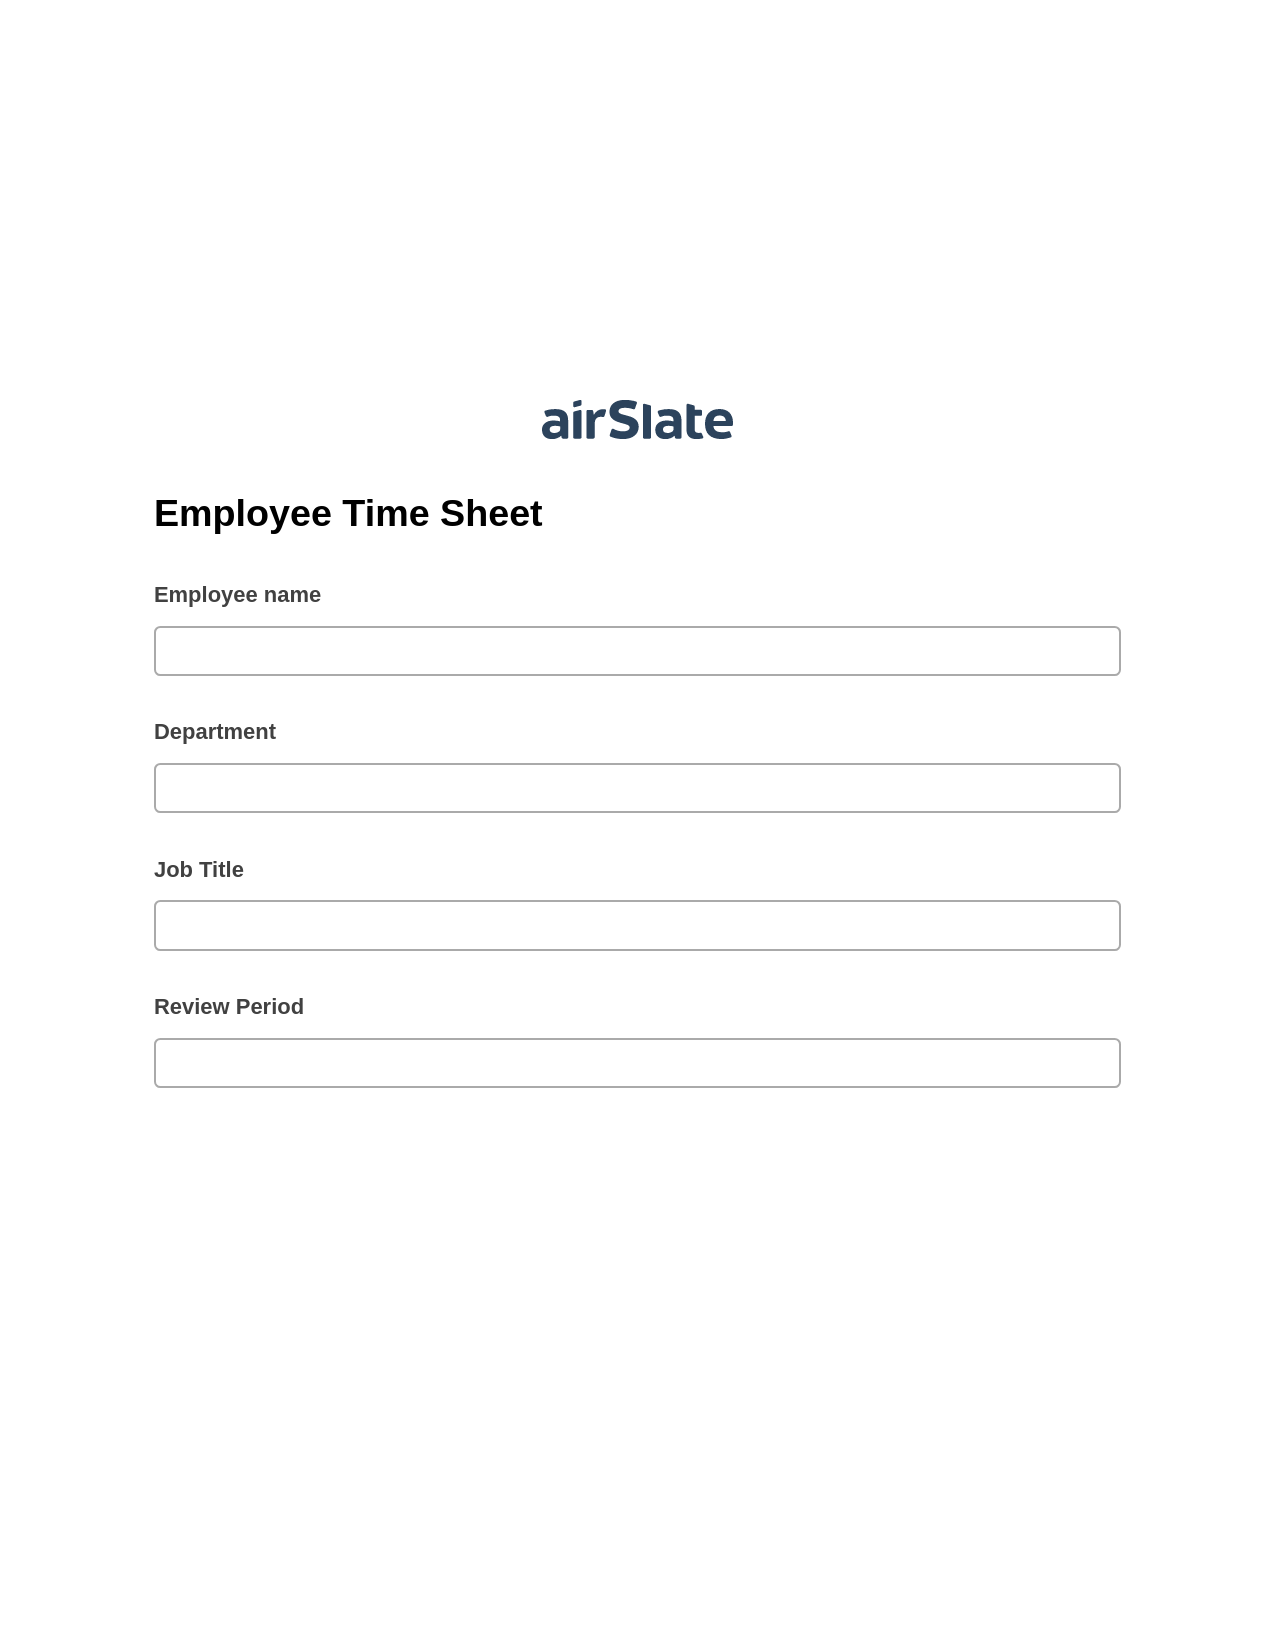 Multirole Employee Time Sheet Pre-fill Dropdowns from Excel Bot, Remove Tags From Slate Bot, Archive to OneDrive Bot